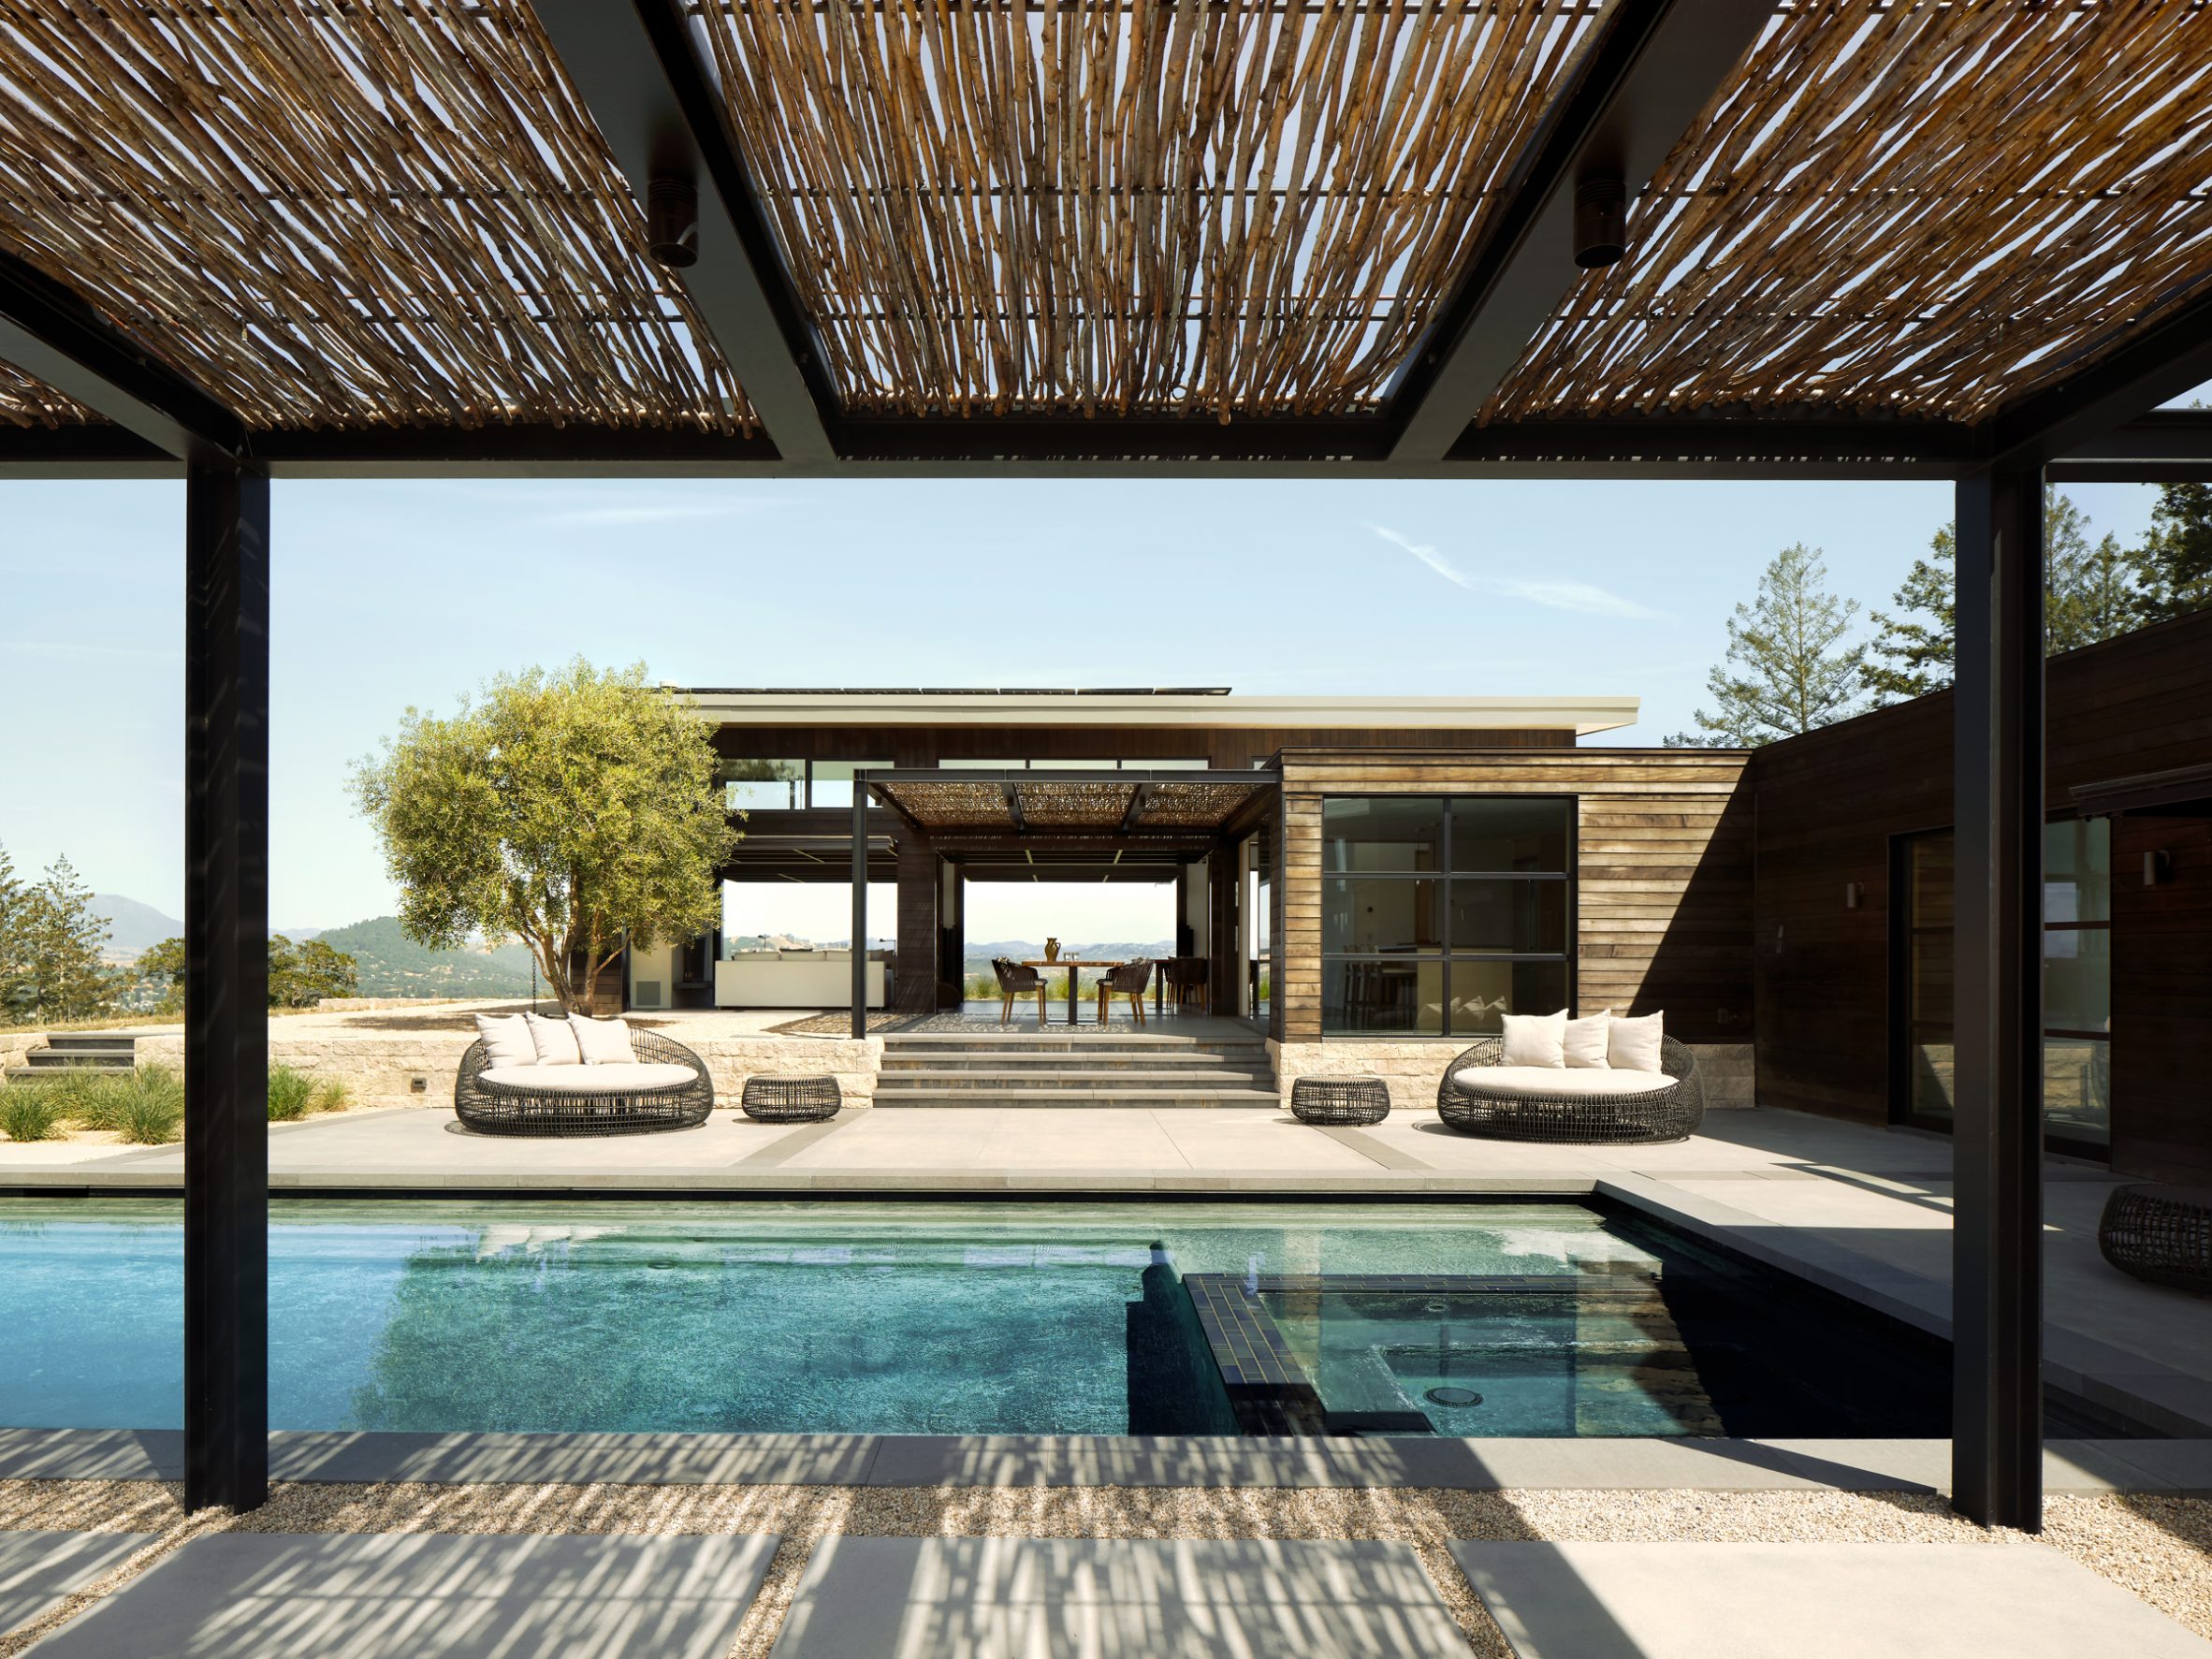 Swimming pool and terrace at California hilltop home